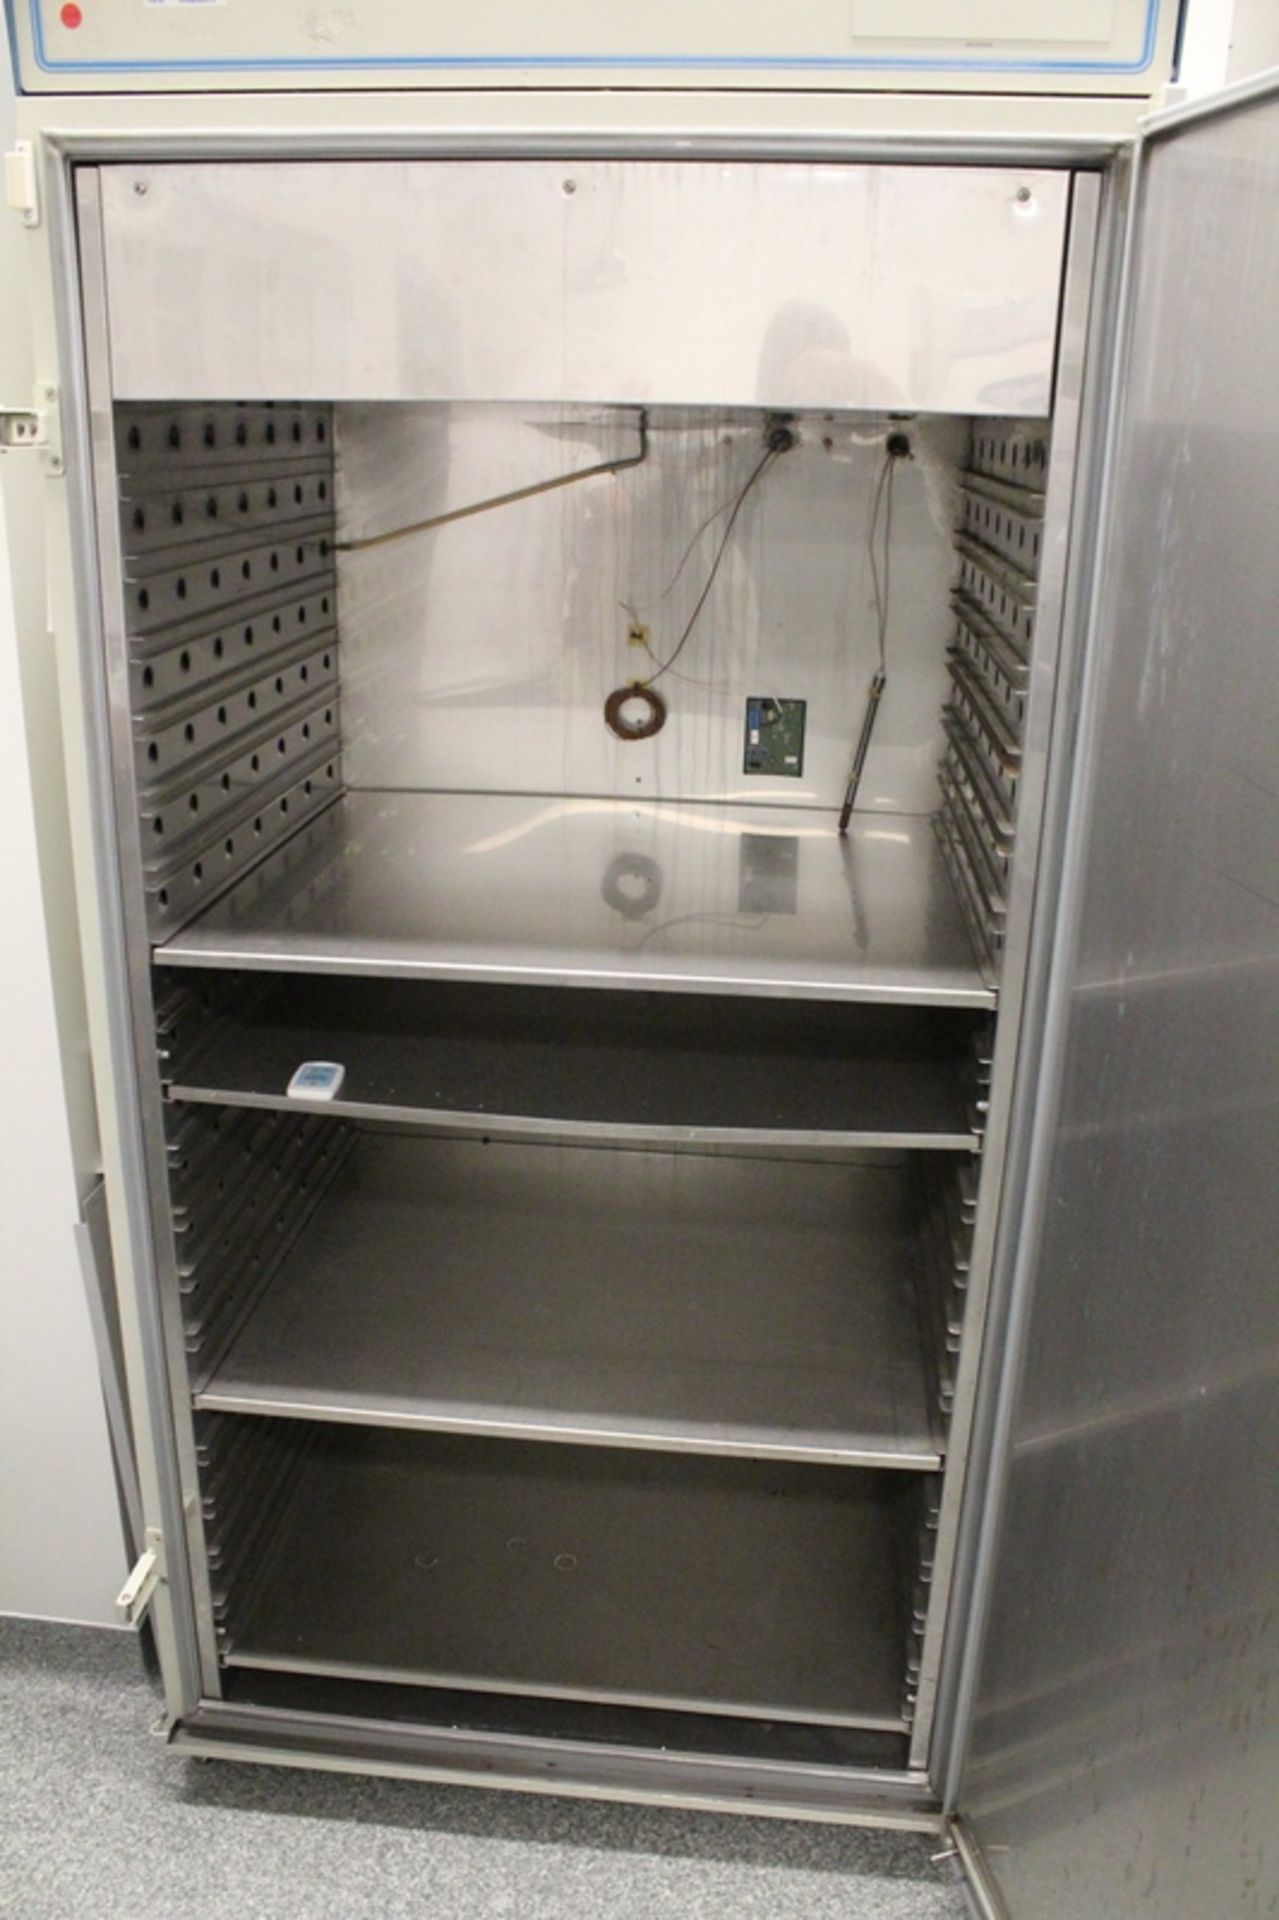 Lunaire Model CE0932W-3 Environmental Chamber, s/n 25295-03, 28”X32”X60” High Opening, with Trays, - Image 4 of 4